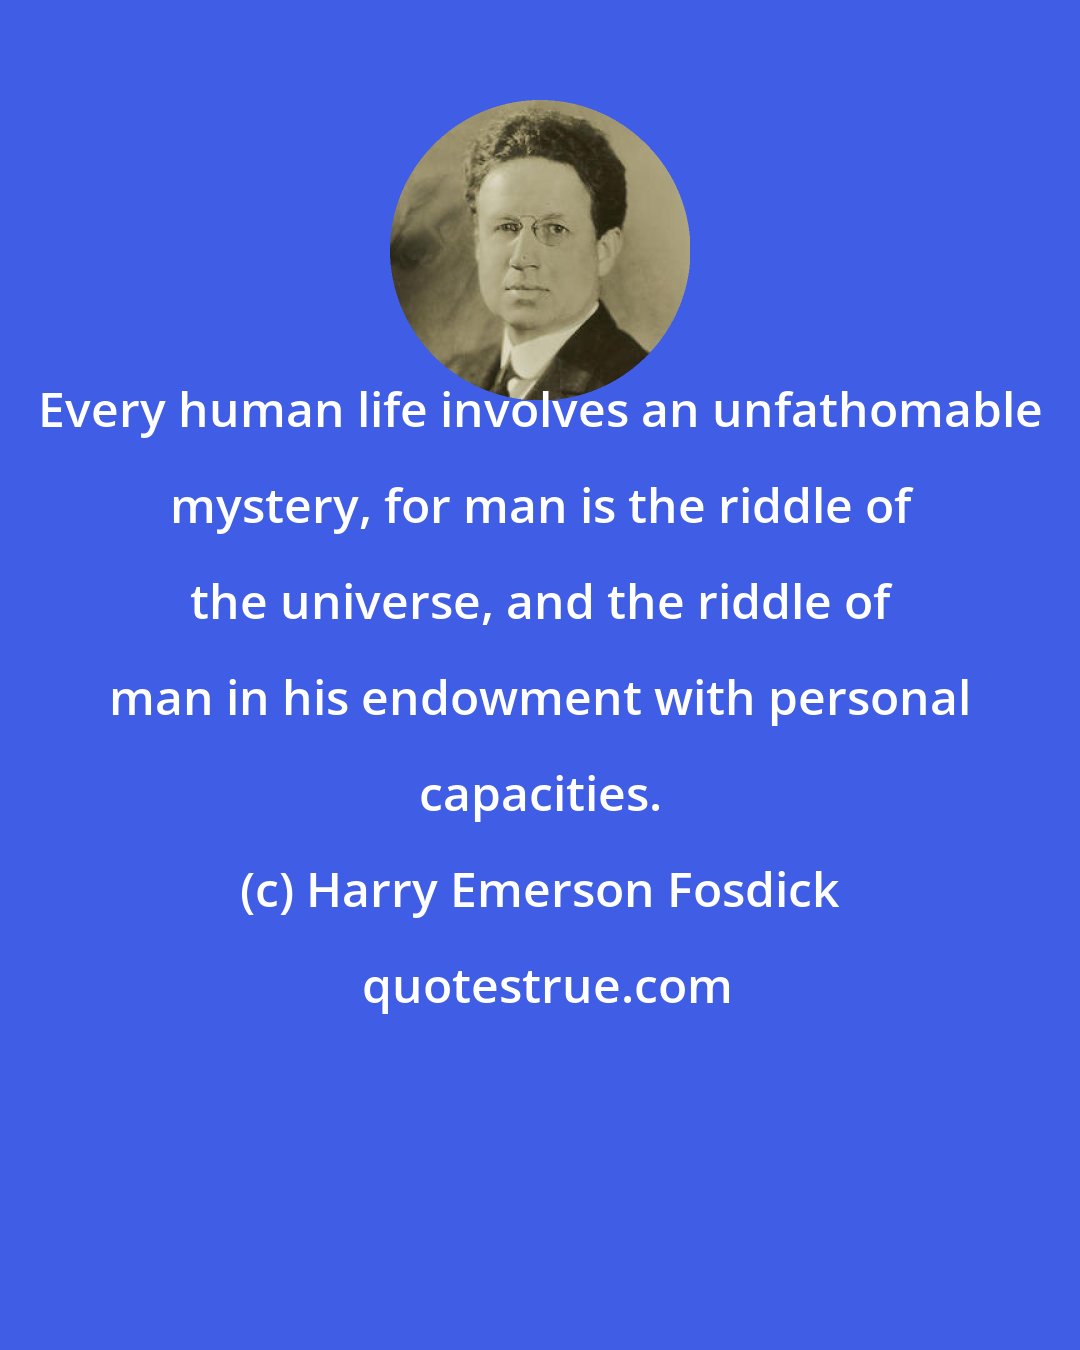 Harry Emerson Fosdick: Every human life involves an unfathomable mystery, for man is the riddle of the universe, and the riddle of man in his endowment with personal capacities.